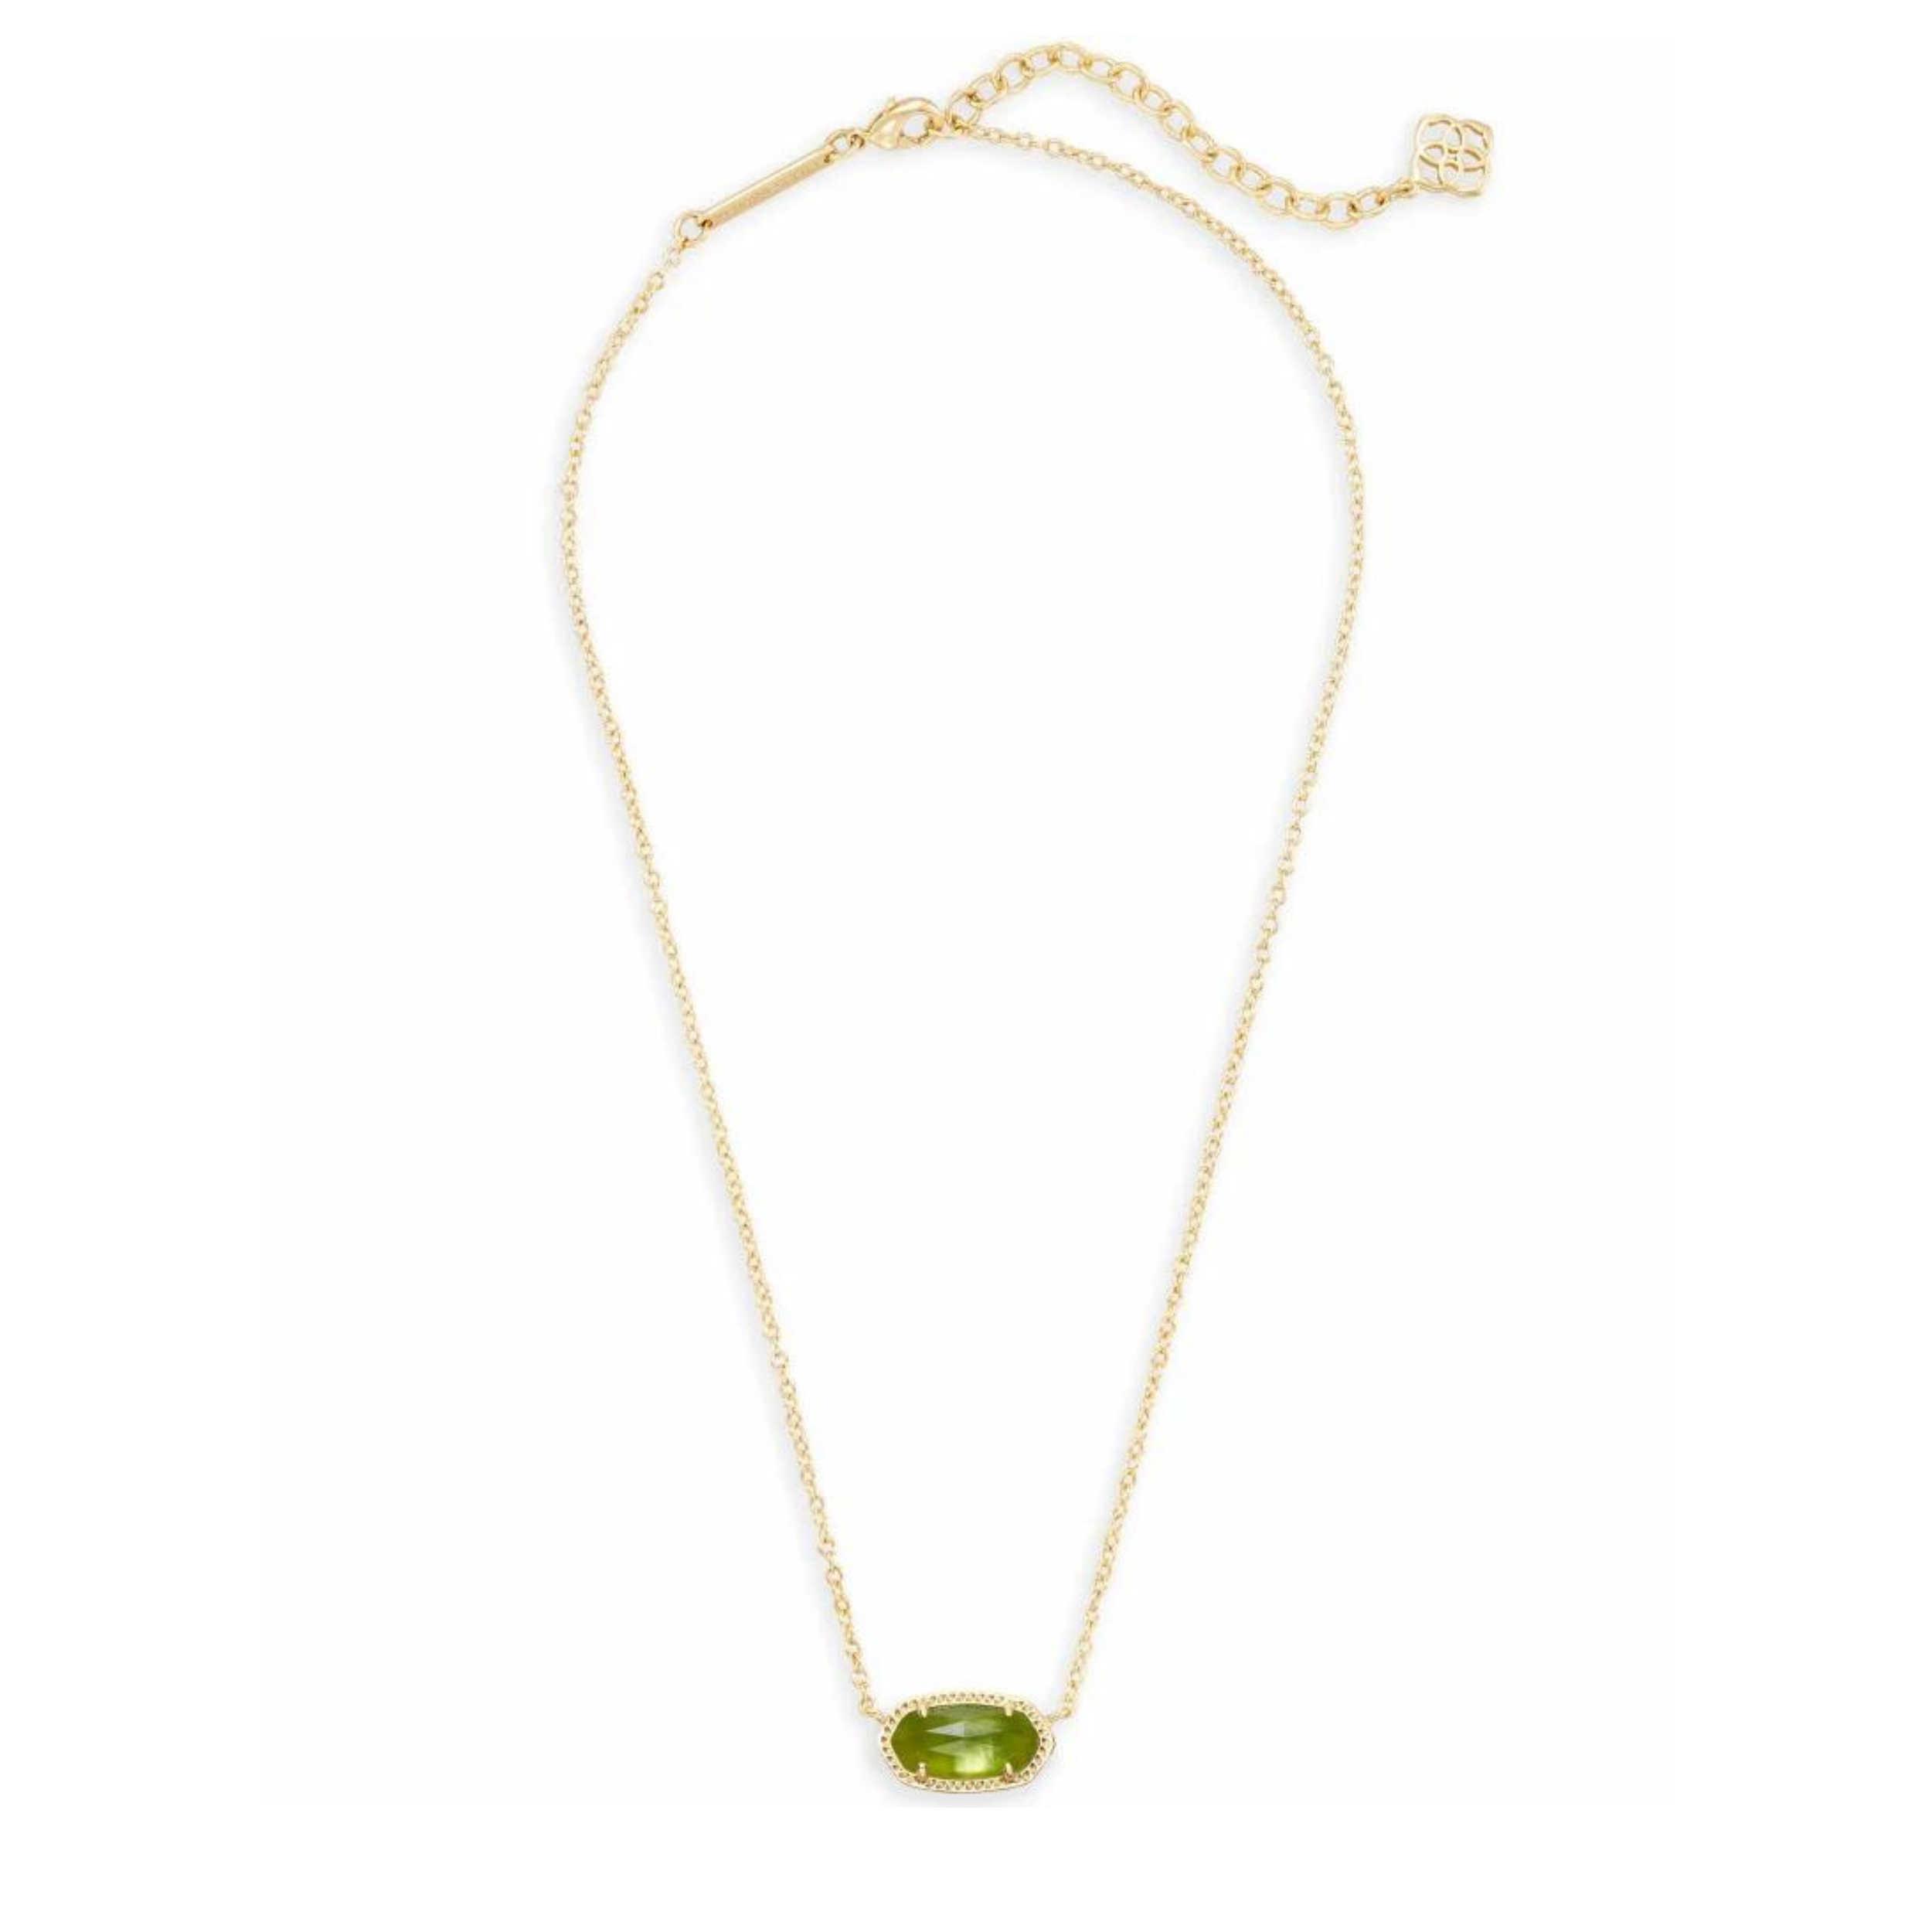 Kendra Scott |  Elisa Pendant Necklace in Peridot Illusion - Giddy Up Glamour Boutique